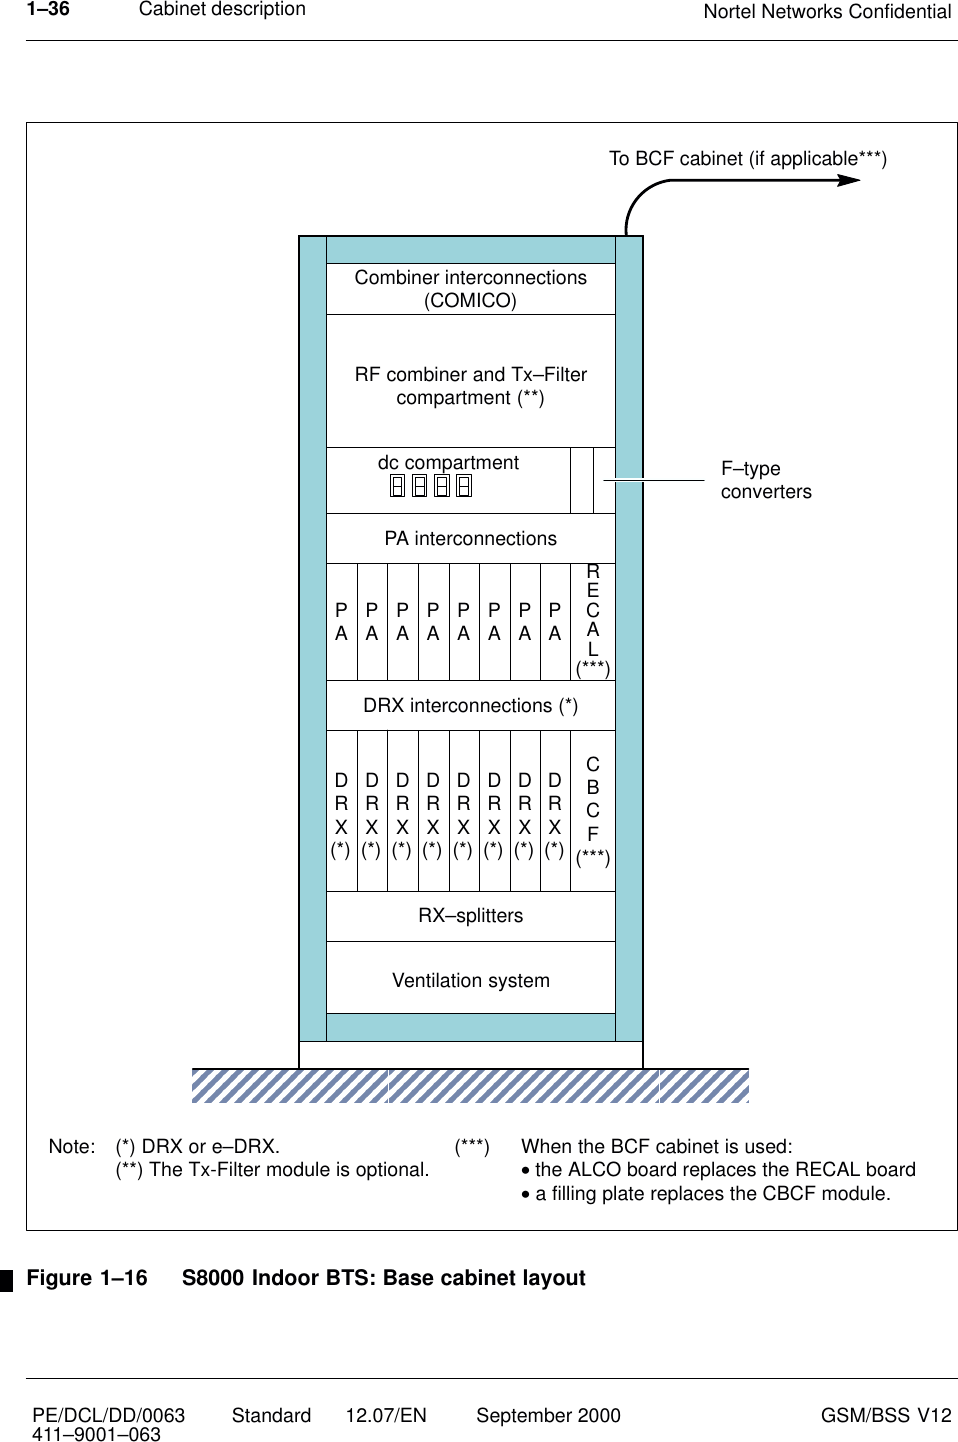 Cabinet description Nortel Networks Confidential1–36PE/DCL/DD/0063411–9001–063 Standard      12.07/EN September 2000 GSM/BSS V12PADRX interconnections (*)RF combiner and Tx–Filtercompartment (**)Combiner interconnections(COMICO)F–typeconvertersPA interconnectionsRECAL(***)PAPAPAPAPAPAPADRXDRXDRXdc compartmentDRXDRXDRXDRXDRXCBCF(***)(*) (*) (*) (*) (*) (*) (*) (*)RX–splittersTo BCF cabinet (if applicable***)Ventilation system(***) When the BCF cabinet is used:•the ALCO board replaces the RECAL board• a filling plate replaces the CBCF module.Note: (*) DRX or e–DRX.(**) The Tx-Filter module is optional.Figure 1–16 S8000 Indoor BTS: Base cabinet layout